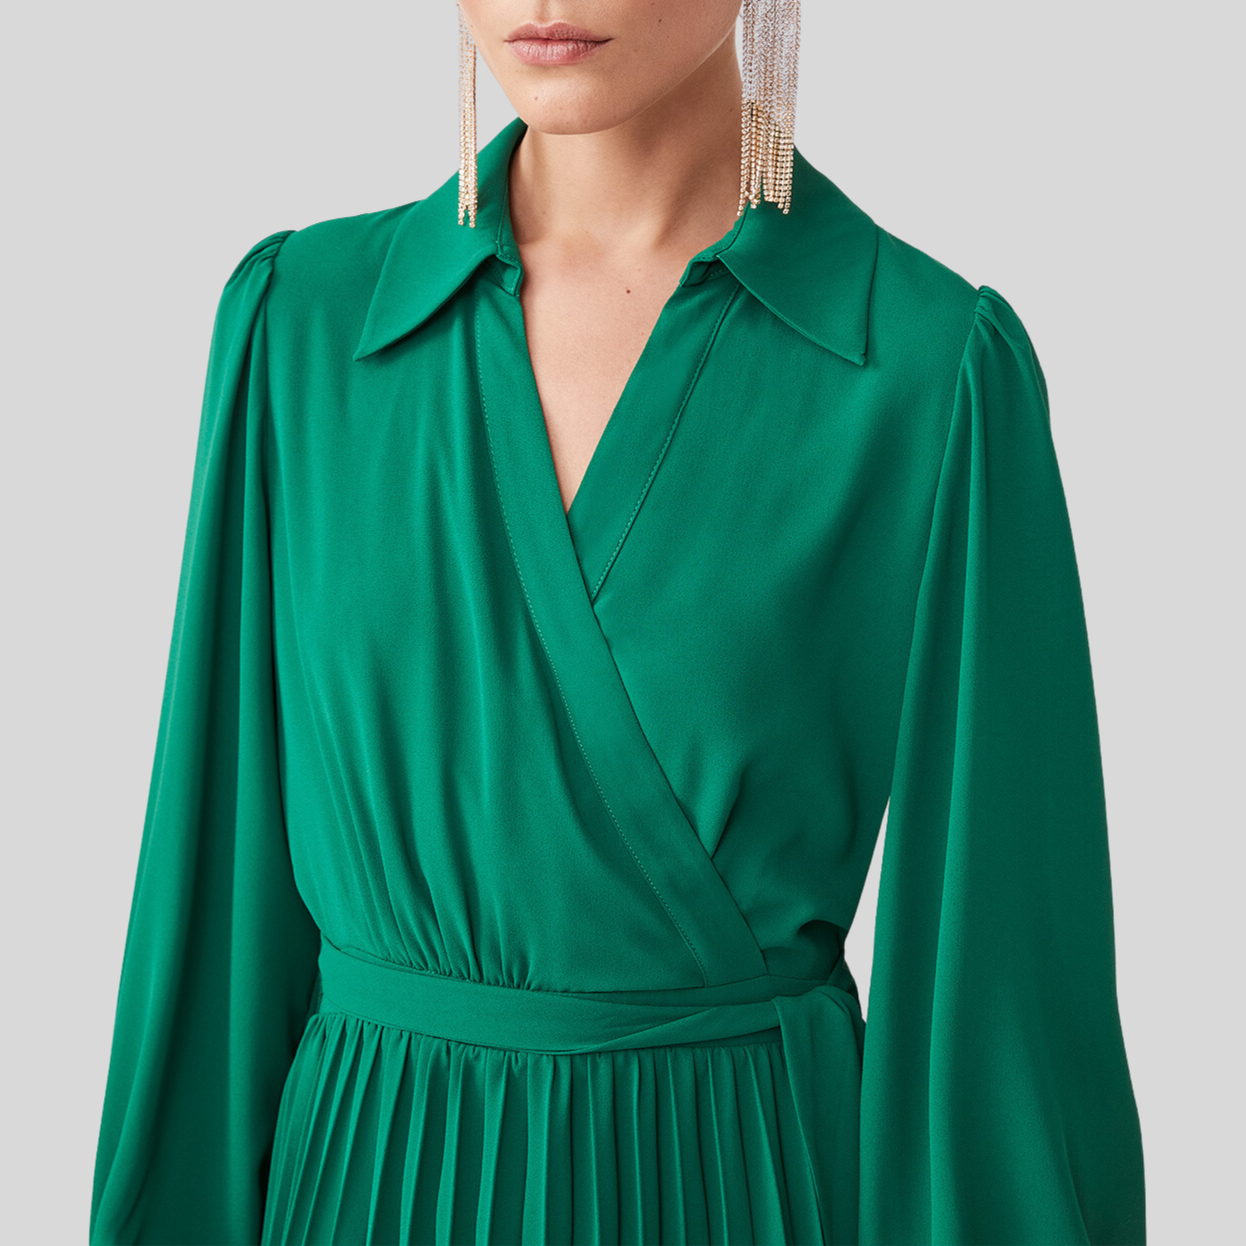 Gotstyle Fashion - Suncoo Dresses Pleated Collared V-Neck Wrap Dress - Green